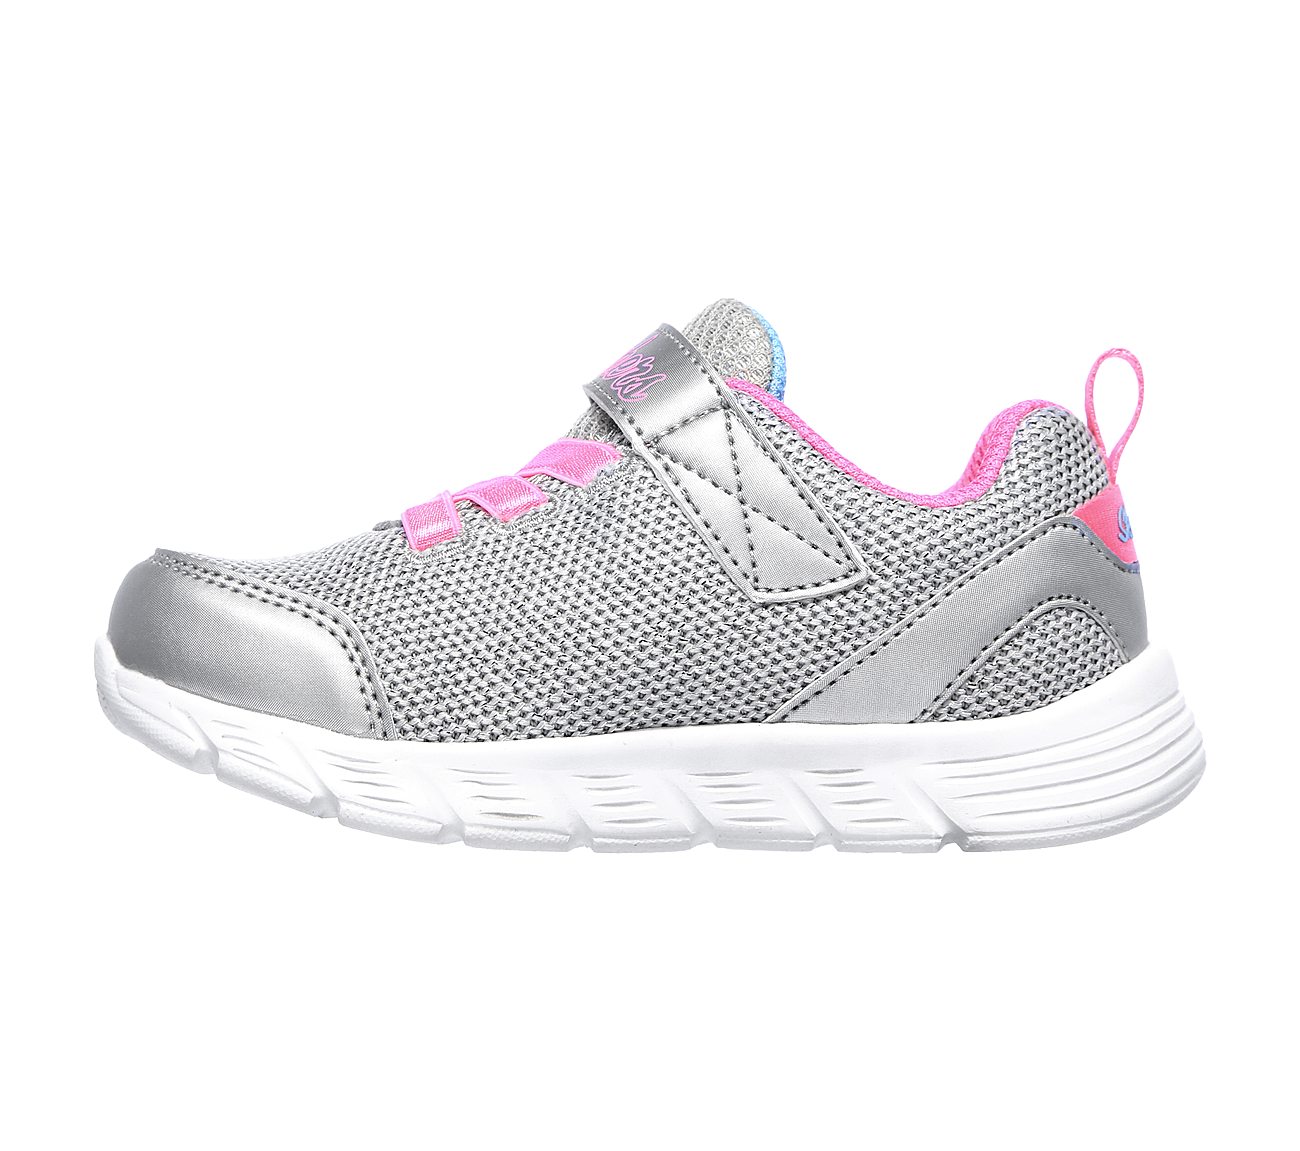 COMFY FLEX - MOVING ON, SILVER/HOT PINK Footwear Left View